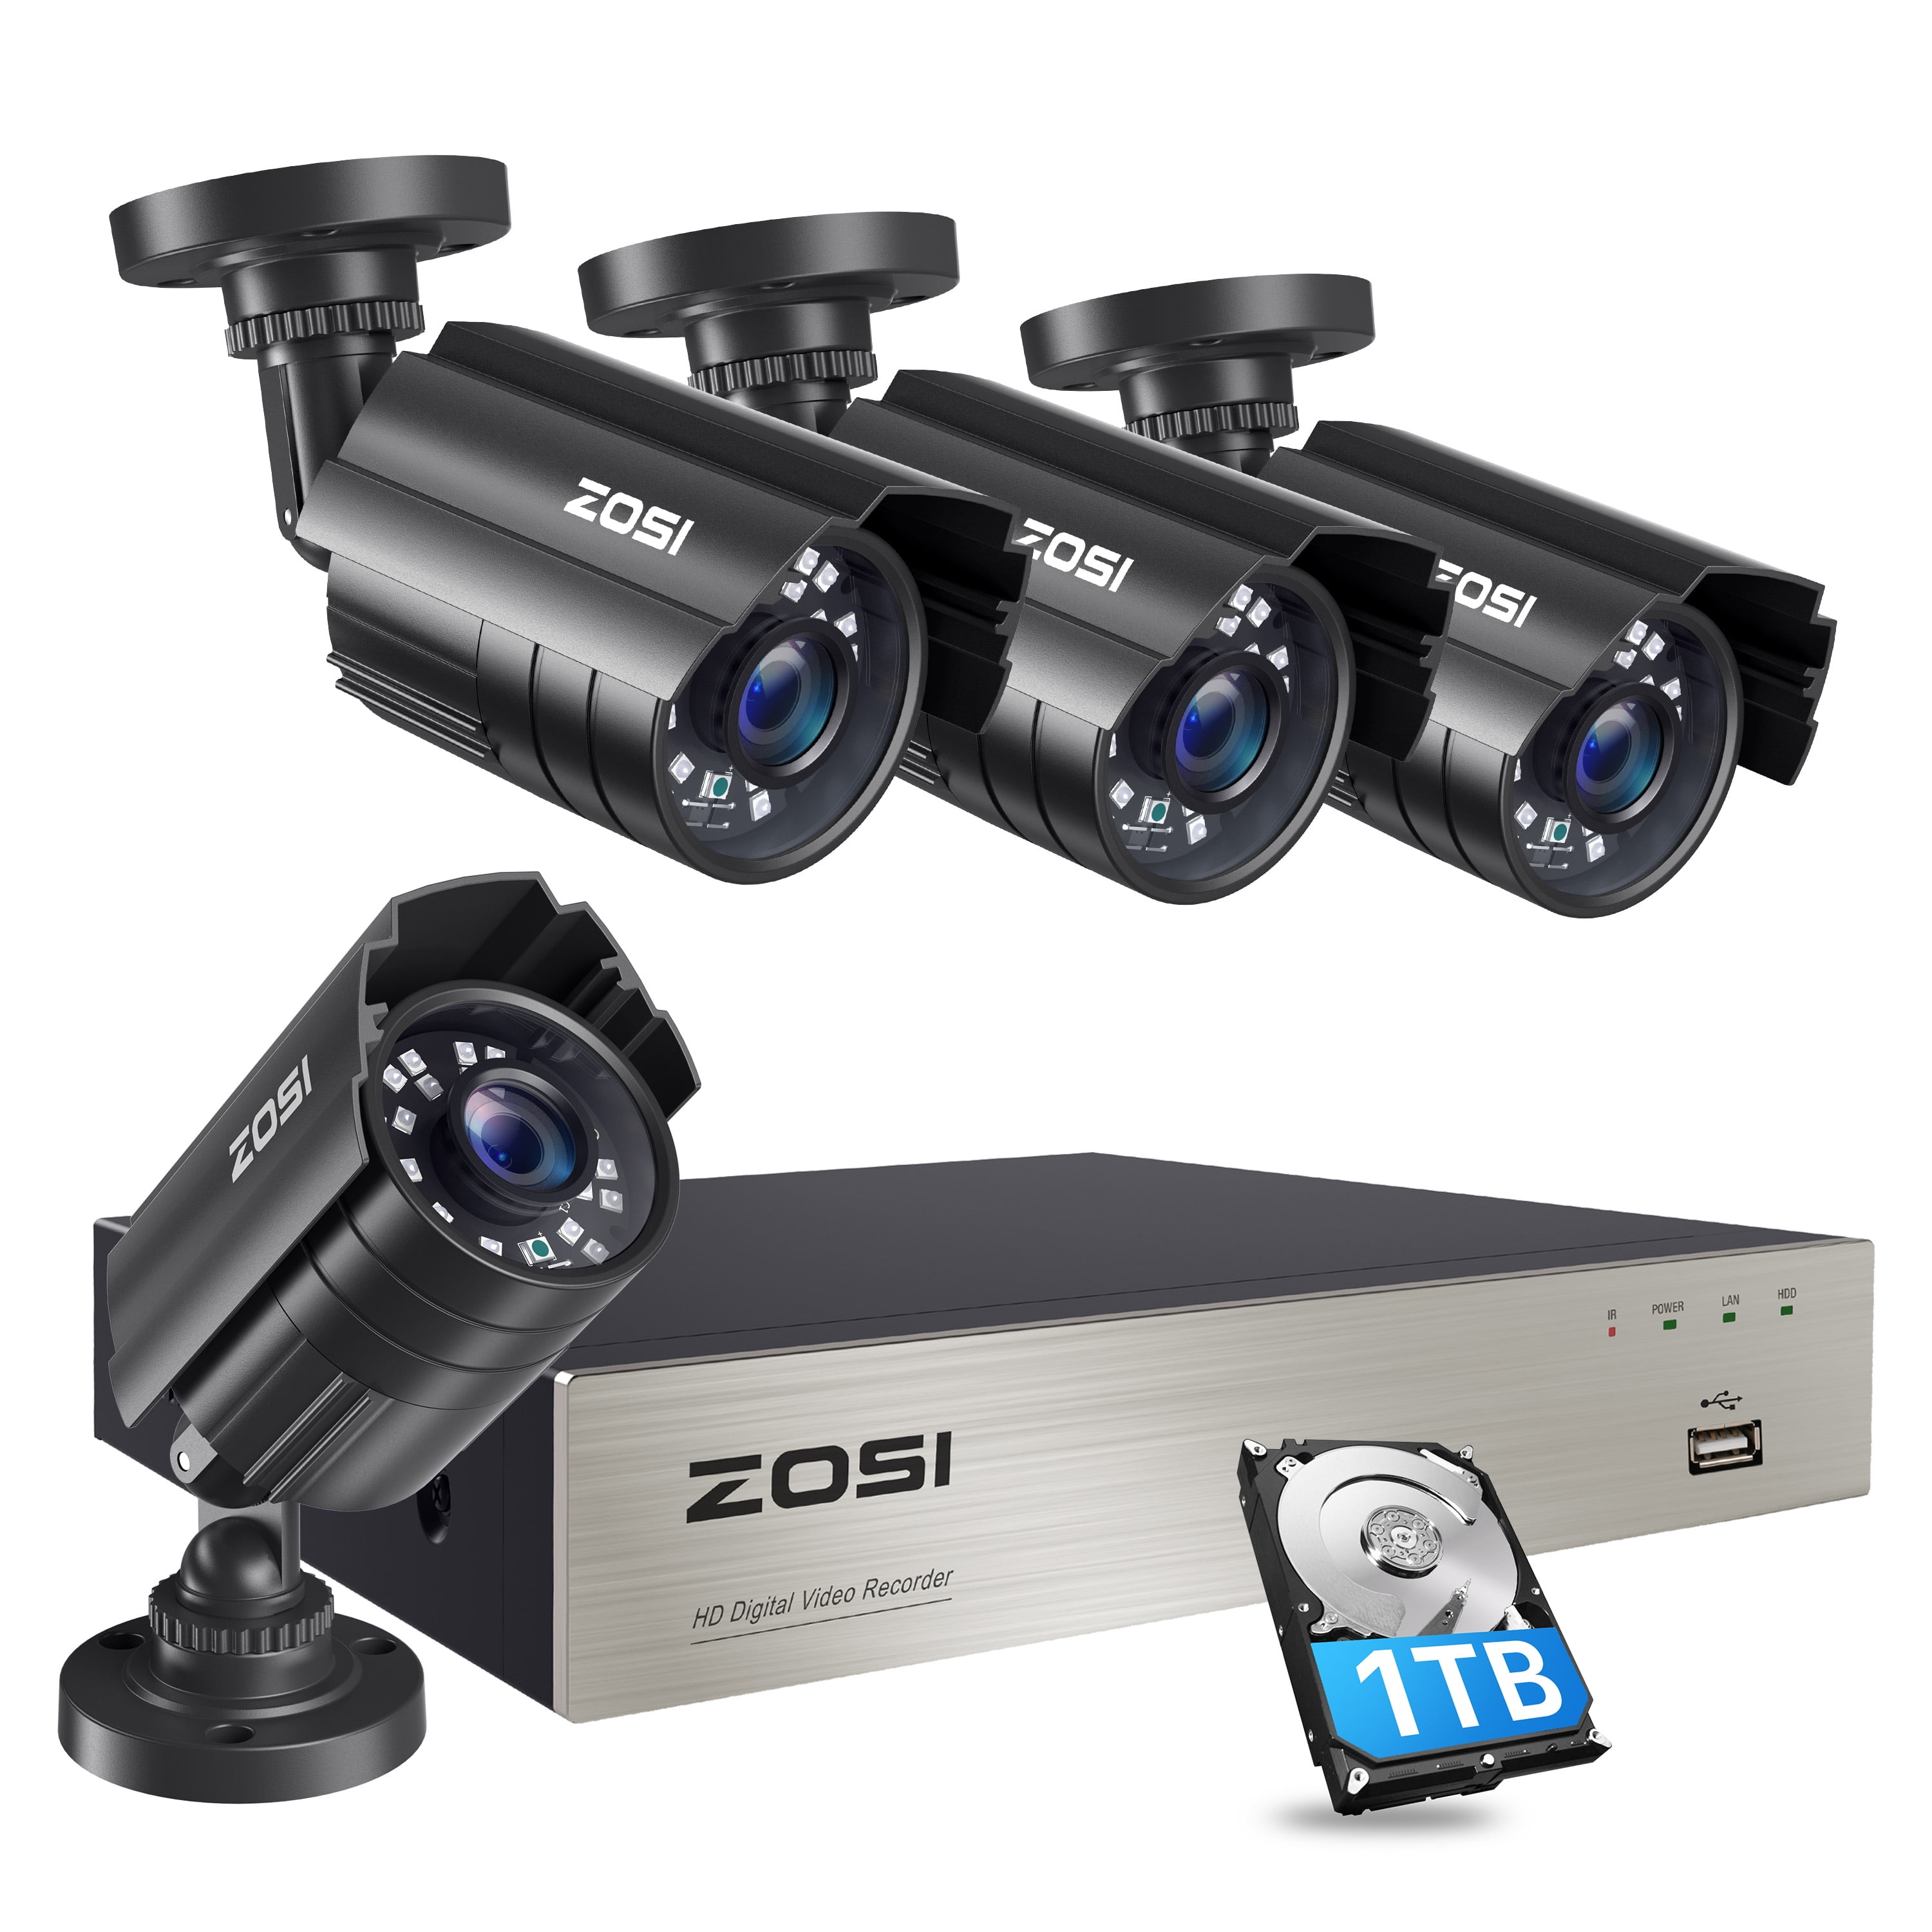 Wade Merchandising bulge ZOSI H.265+ 1080P Security Camera System, 8CH 5MP Lite HD DVR Video  Recorder with 1TB Hard Drive, 4X 2.0MP Indoor Outdoor Weatherproof CCTV  Cameras ,Motion Alert,Remote Access - Walmart.com